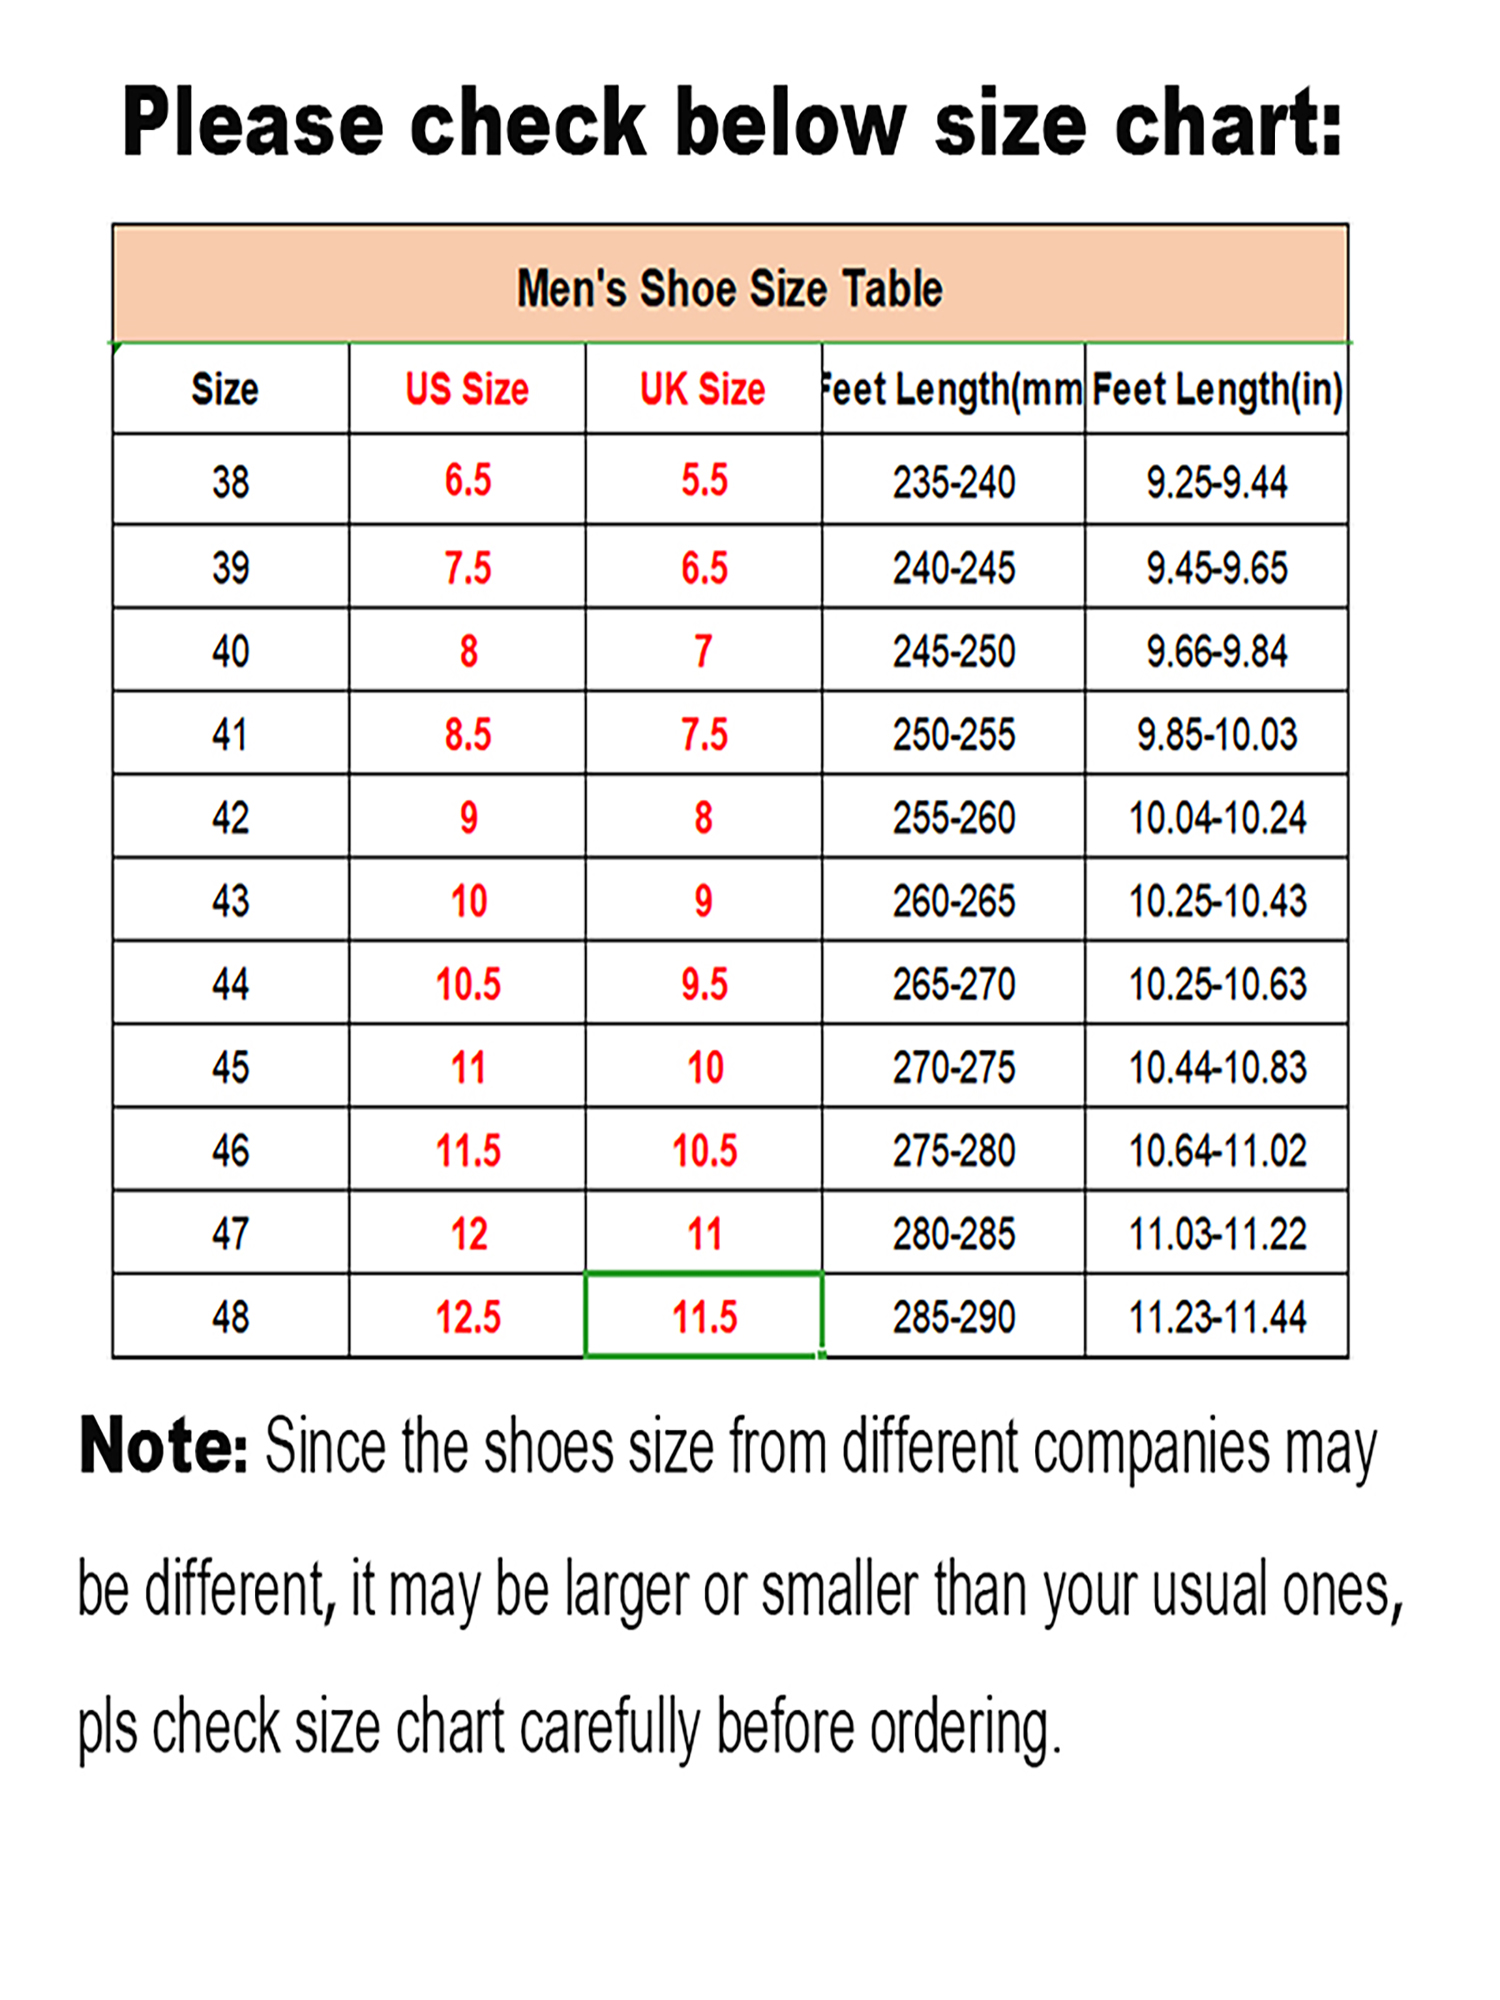 Avamo Mens Ankle Boots, Men's Casual Shoes Zipper Hand Stitching Booties Breathable Non Slip Outdoor Shoes Size 6.5-12.5 - image 2 of 9